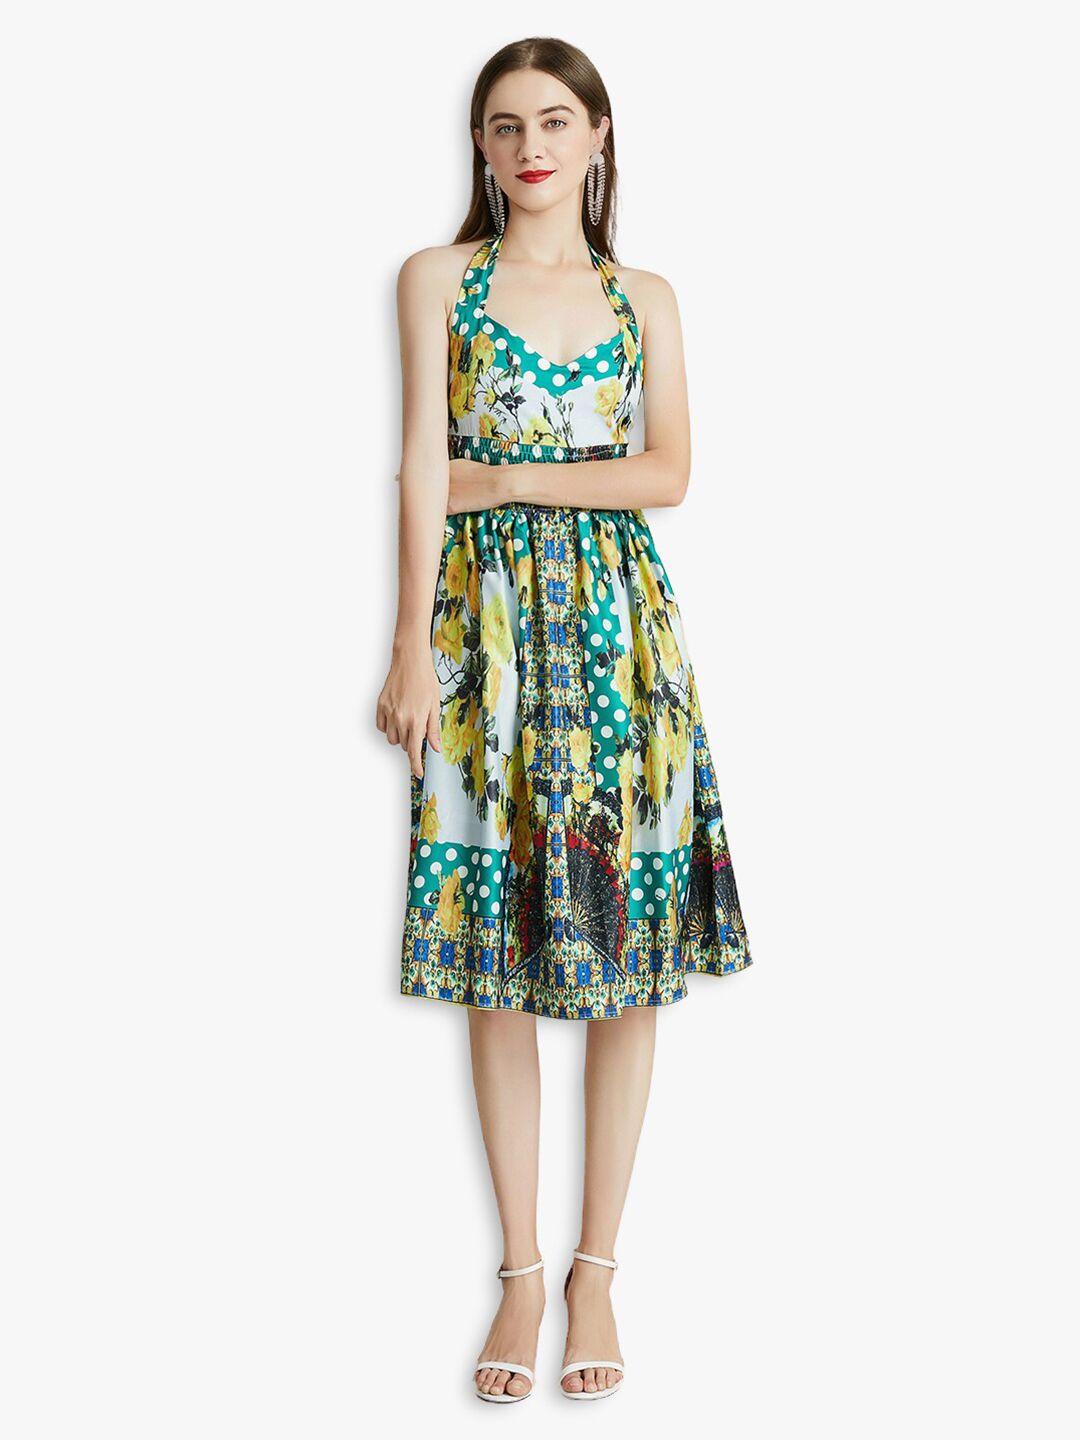 jc-collection-teal-&-yellow-floral-dress